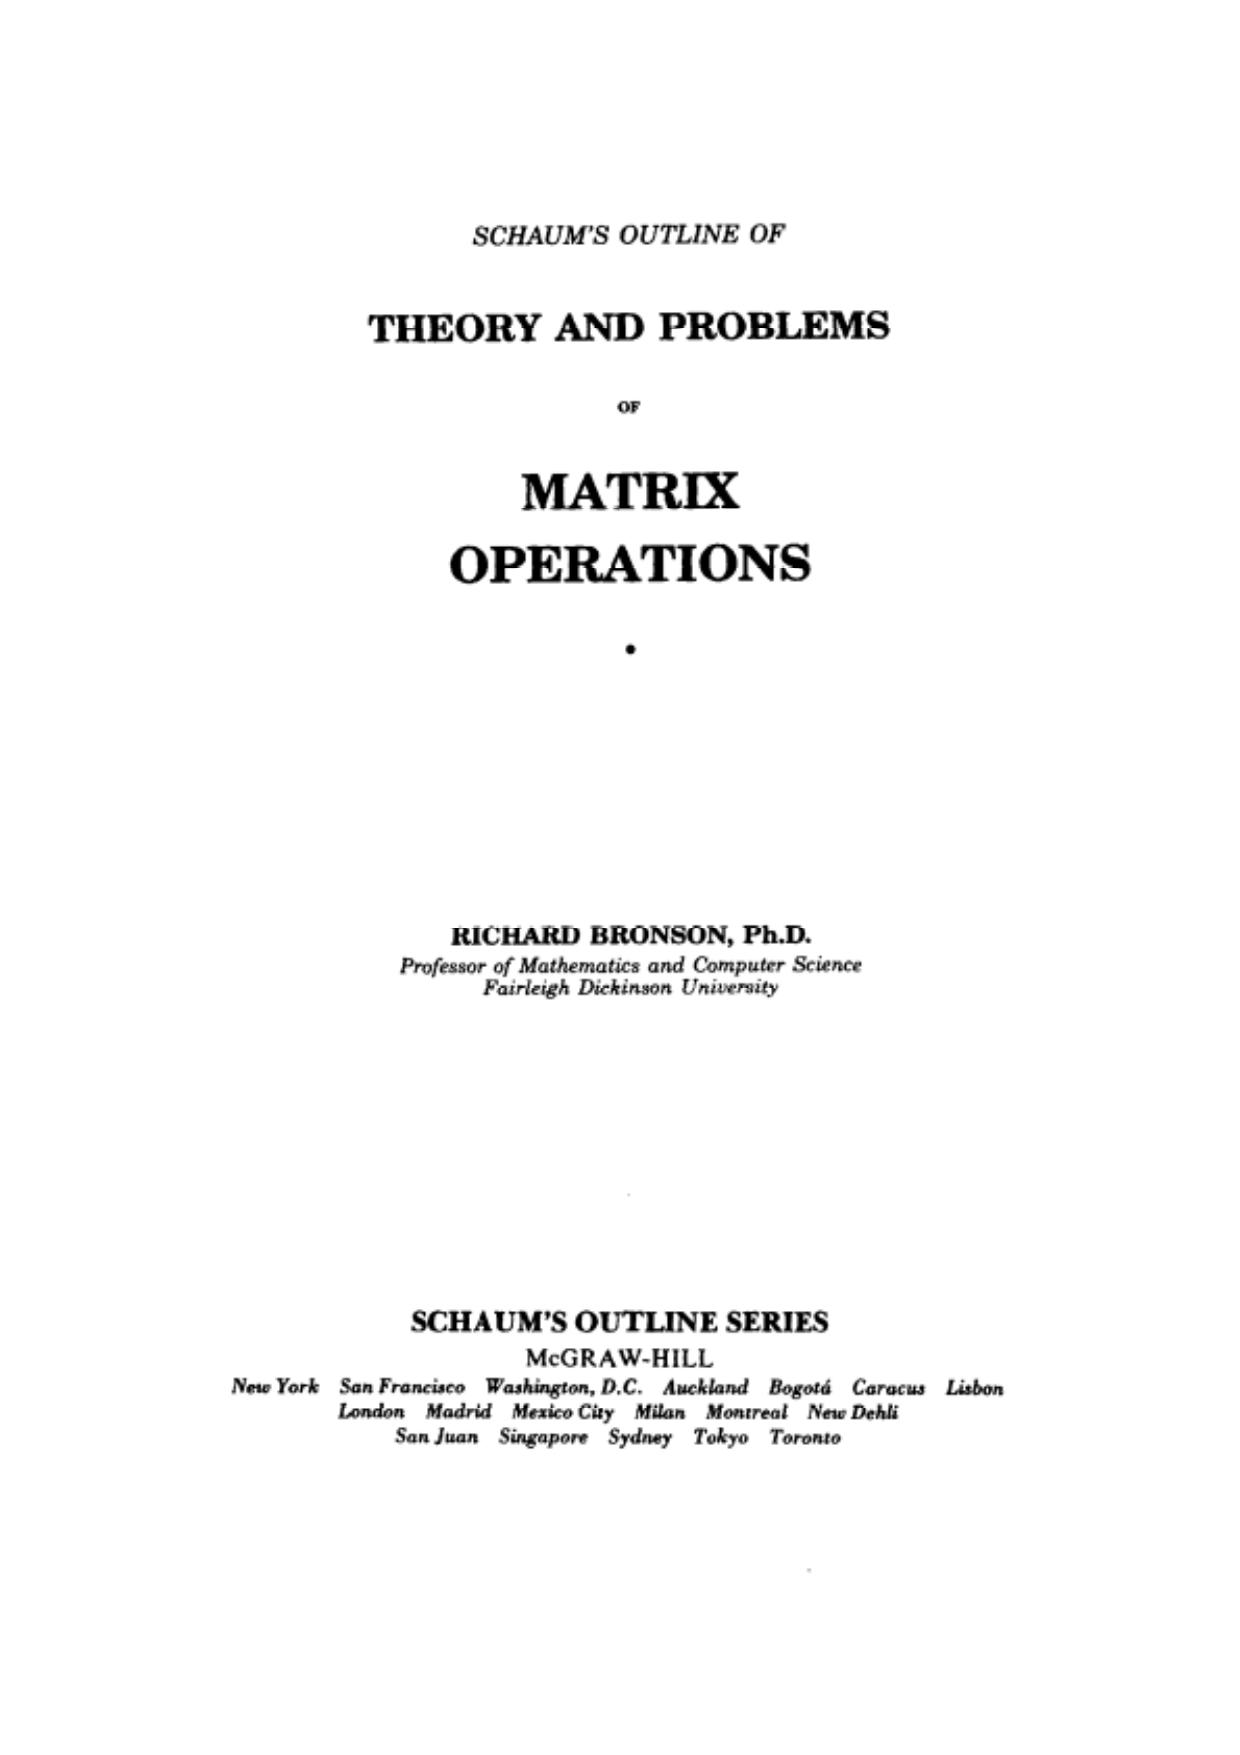 Theory and Problems of Matrix Operations by Richard Bronson